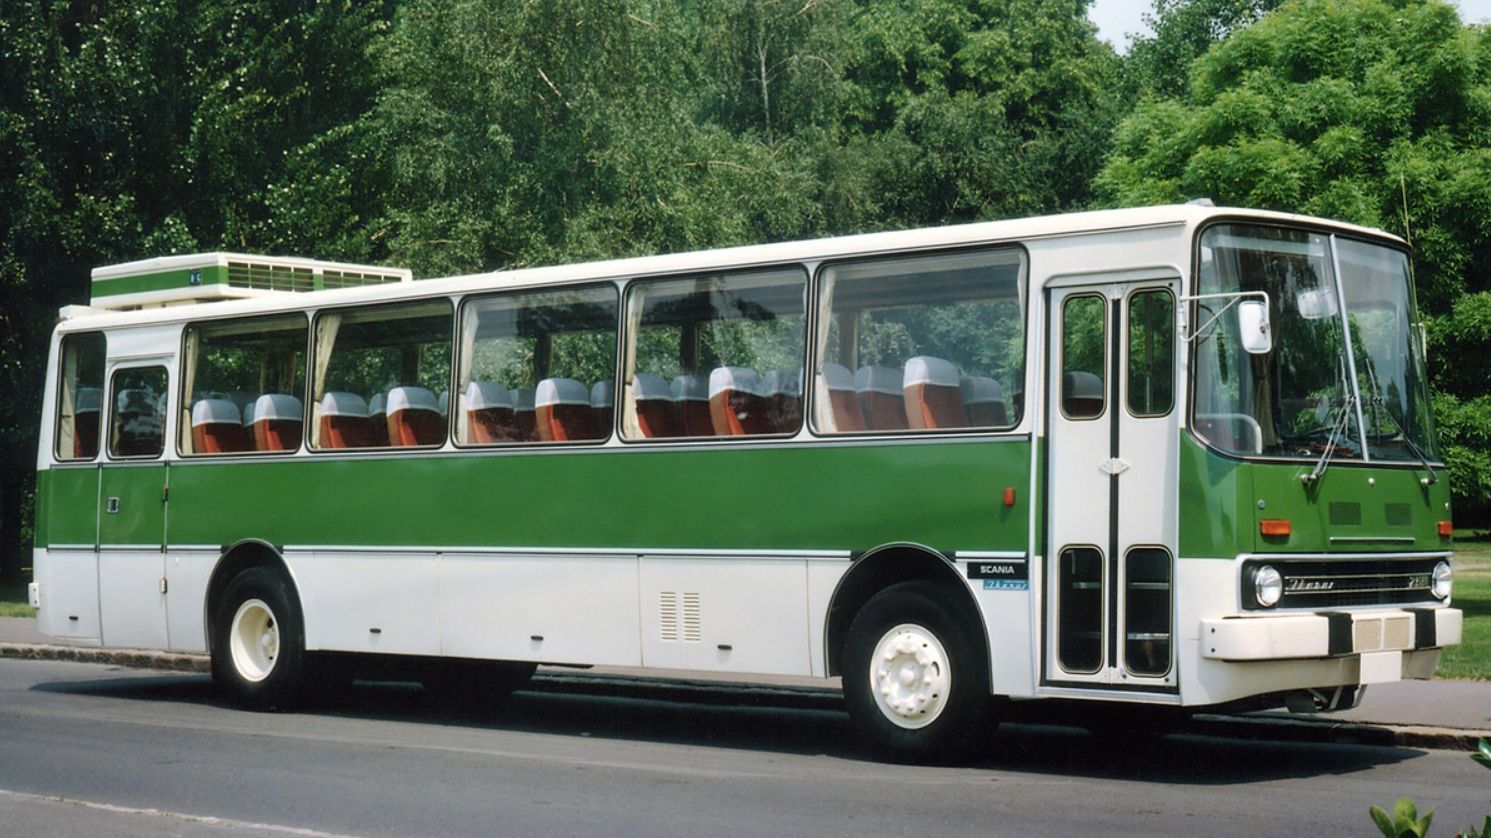 This Hungarian bus served American cities at the height of the